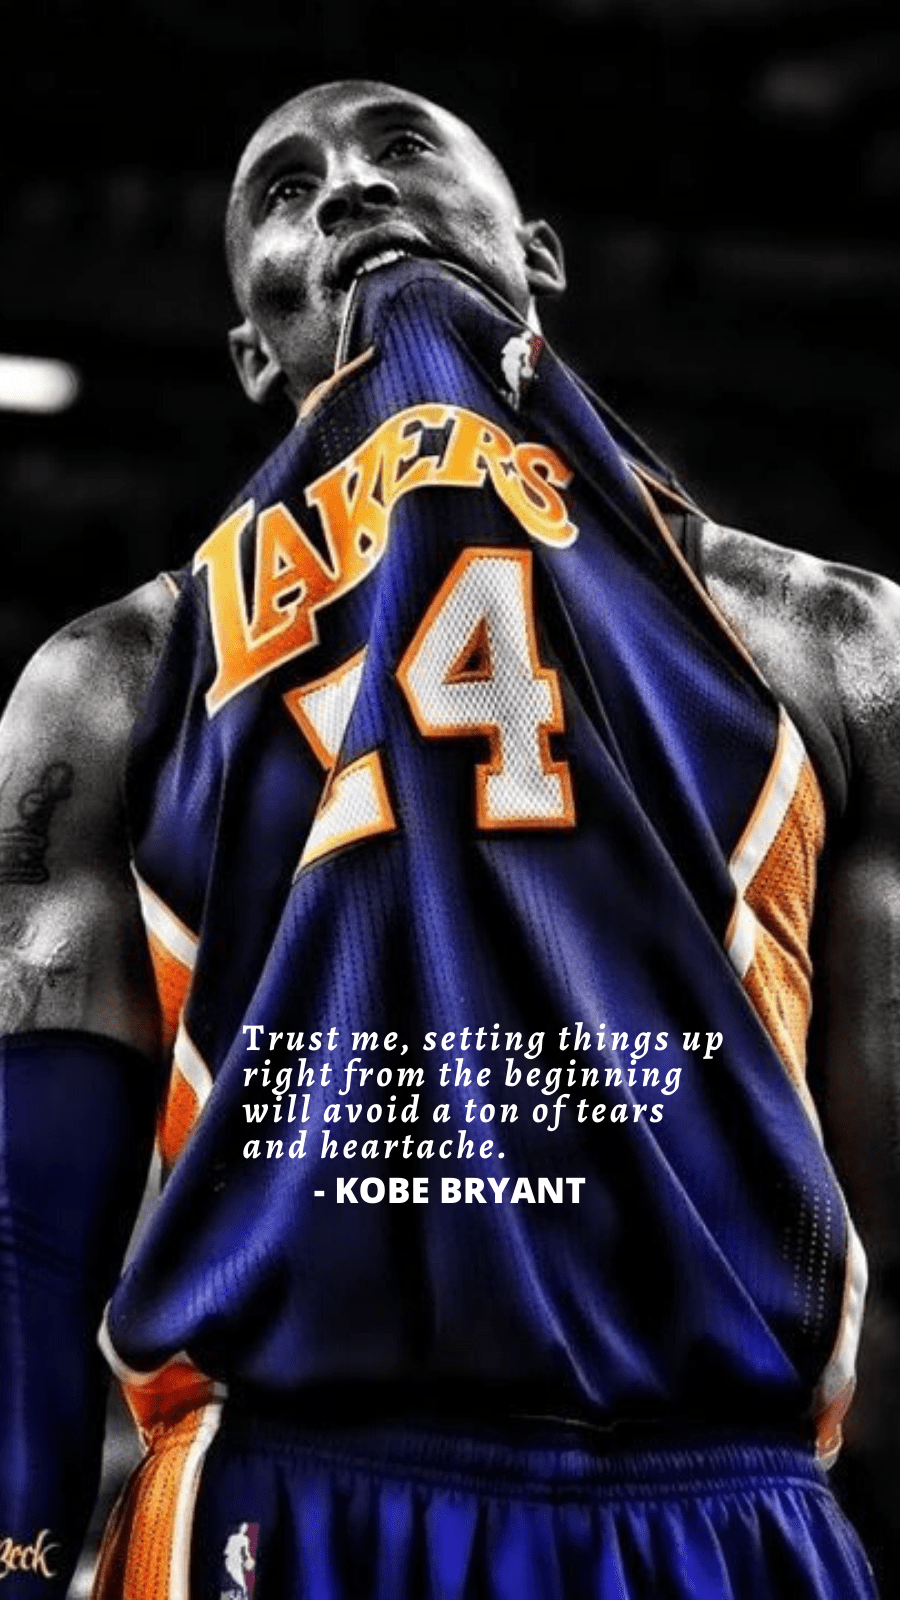 Kobe Bryant Wallpaper From Famous Kobe Quotes. Kobe bryant quotes, Kobe bryant, Kobe bryant wallpaper